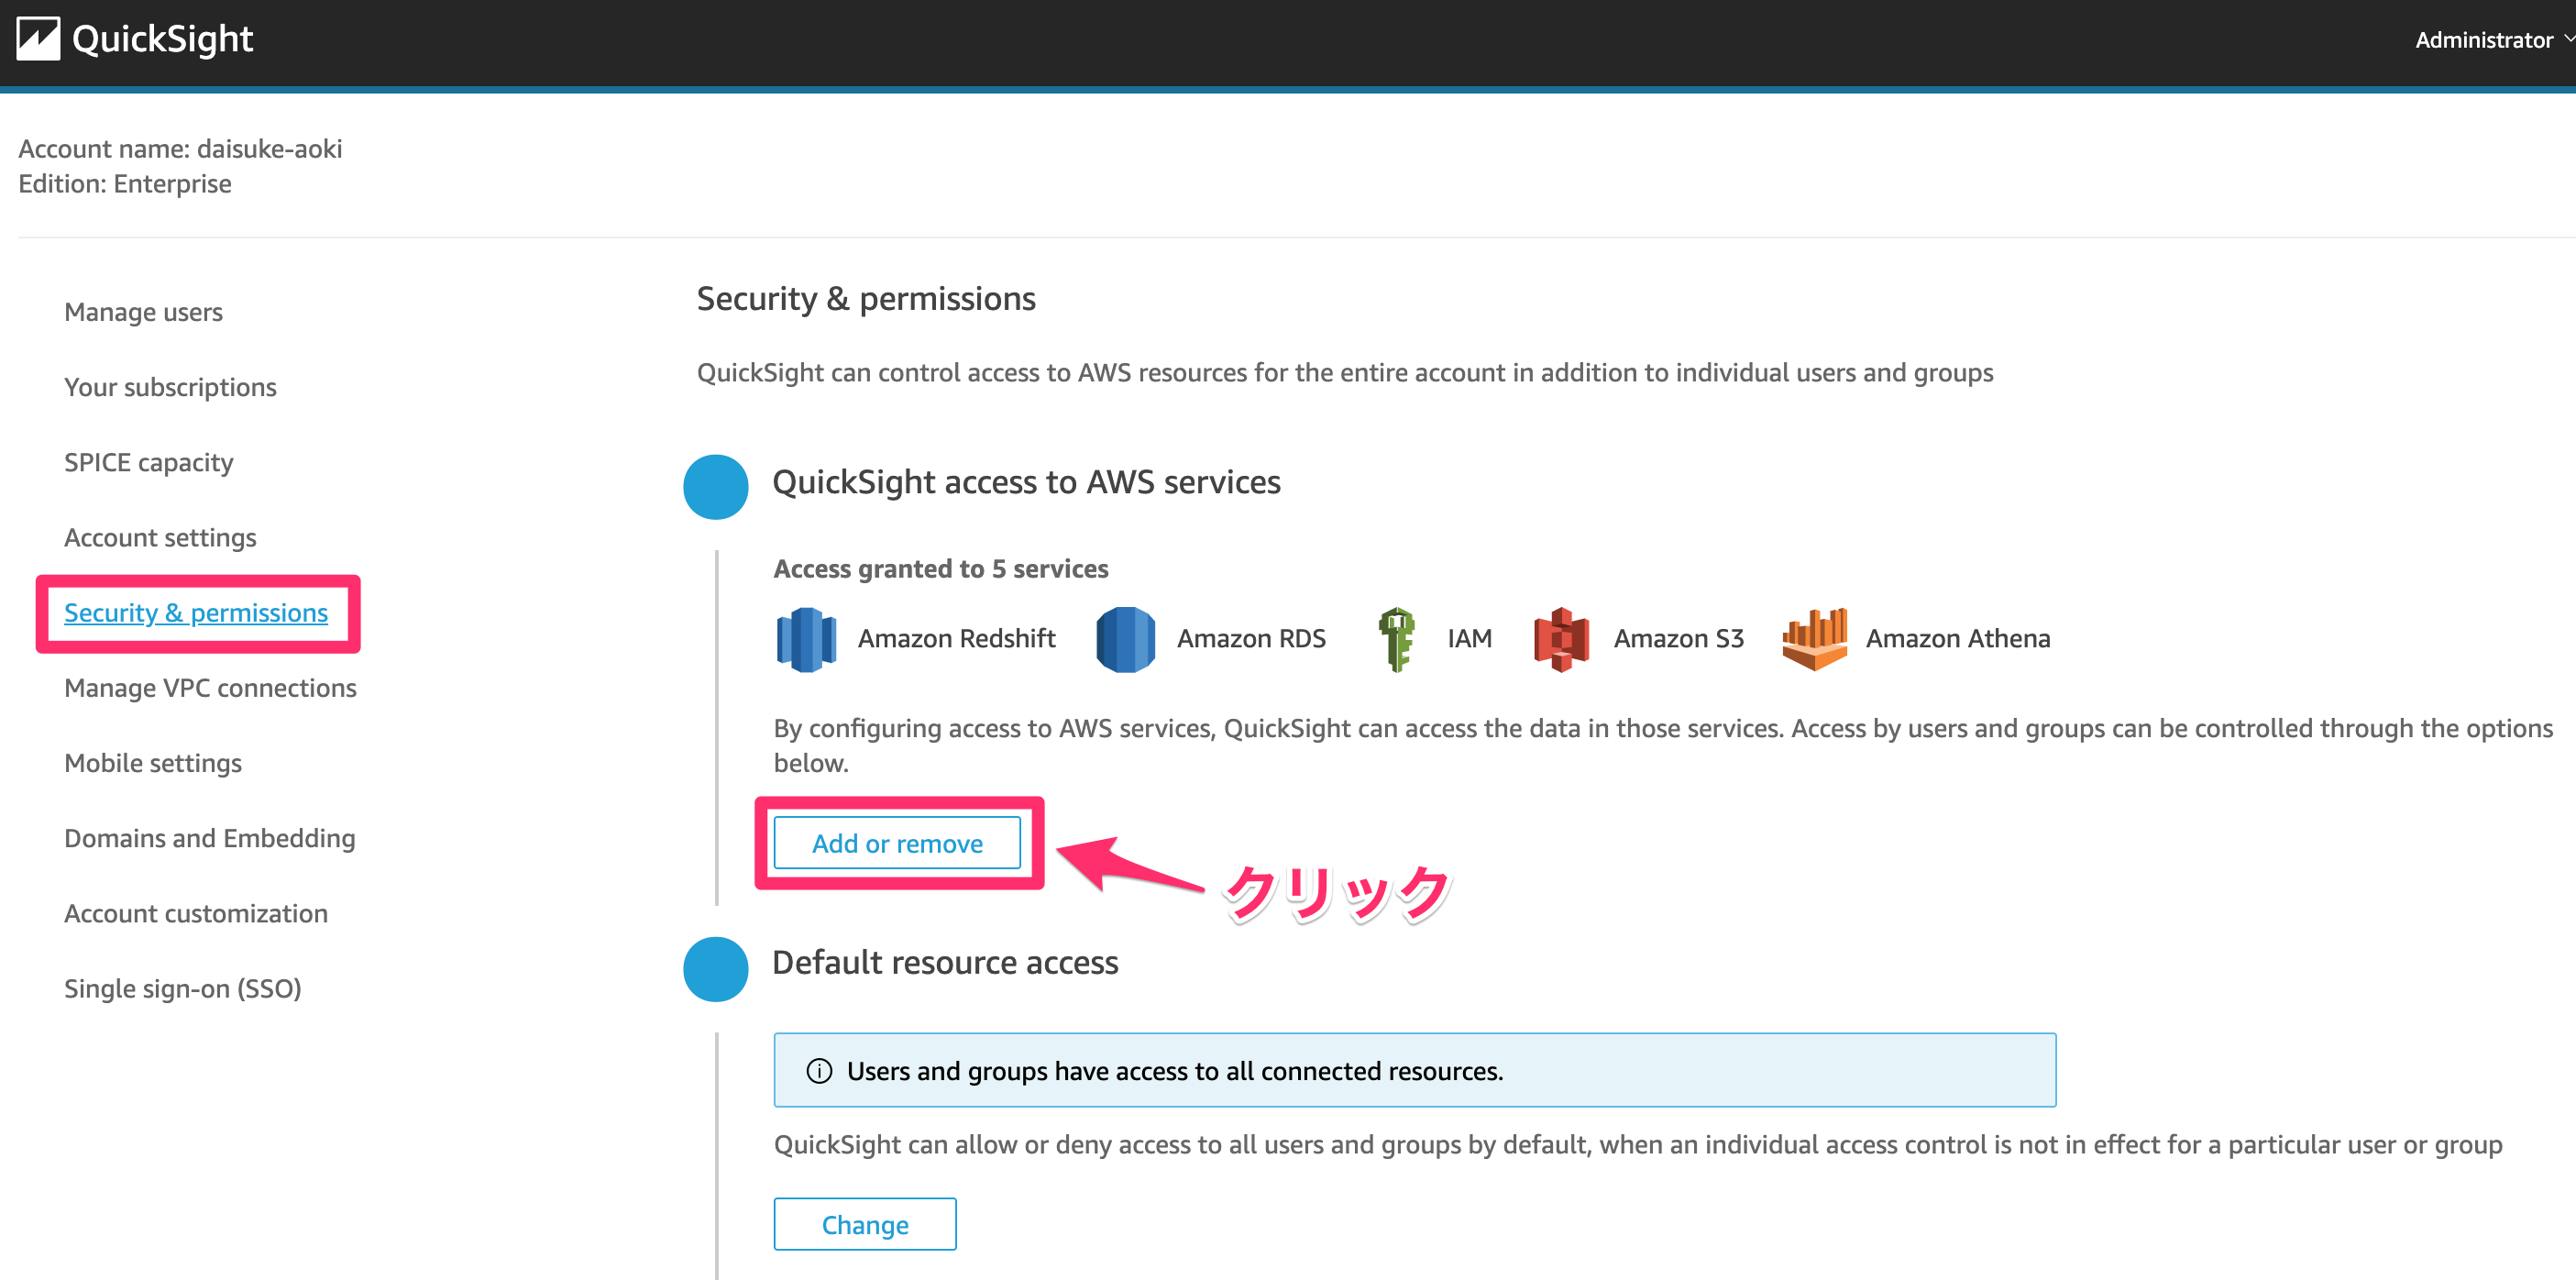 「Security & Permissions」で「Add or remove」を選択